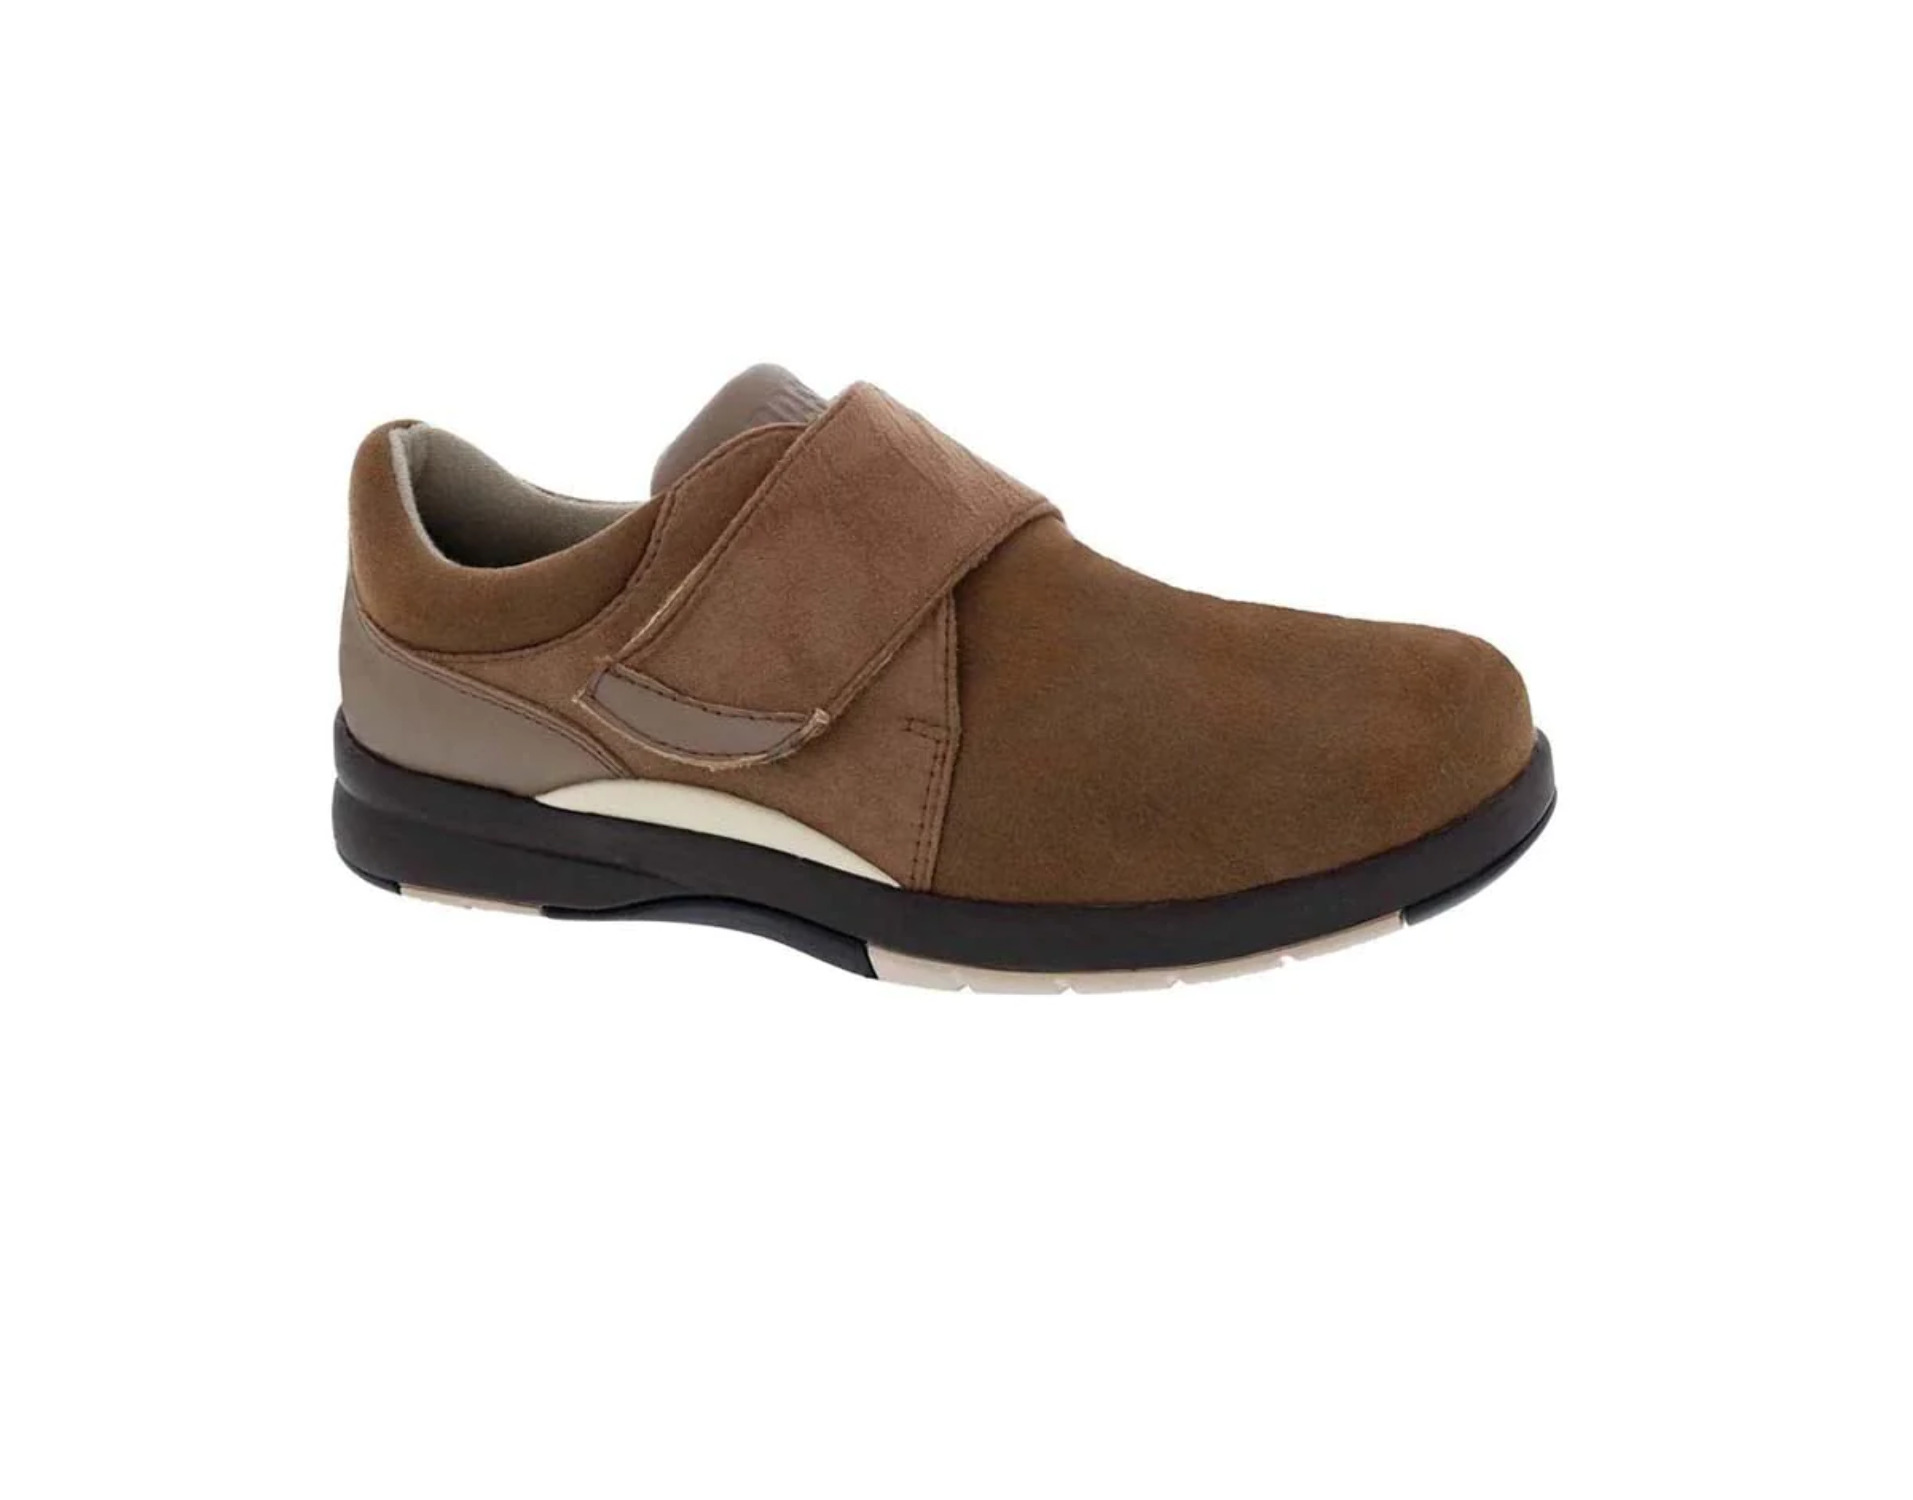 DREW MOONWALK WOMEN CASUAL SHOE IN BROWN STRETCH LEATHER - image 1 of 5